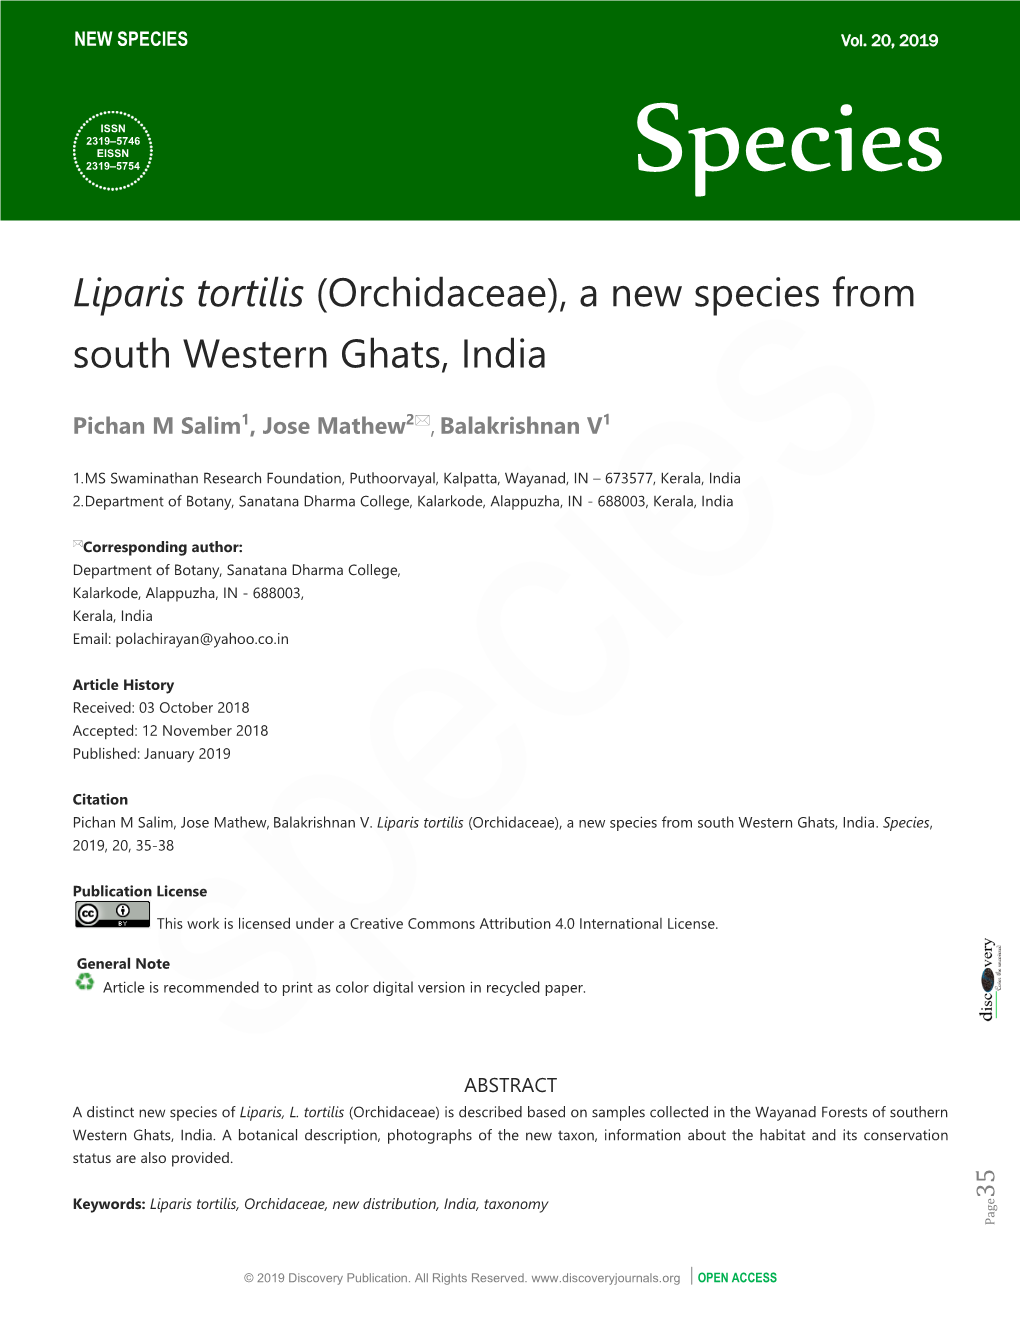 Liparis Tortilis (Orchidaceae), a New Species from South Western Ghats, India